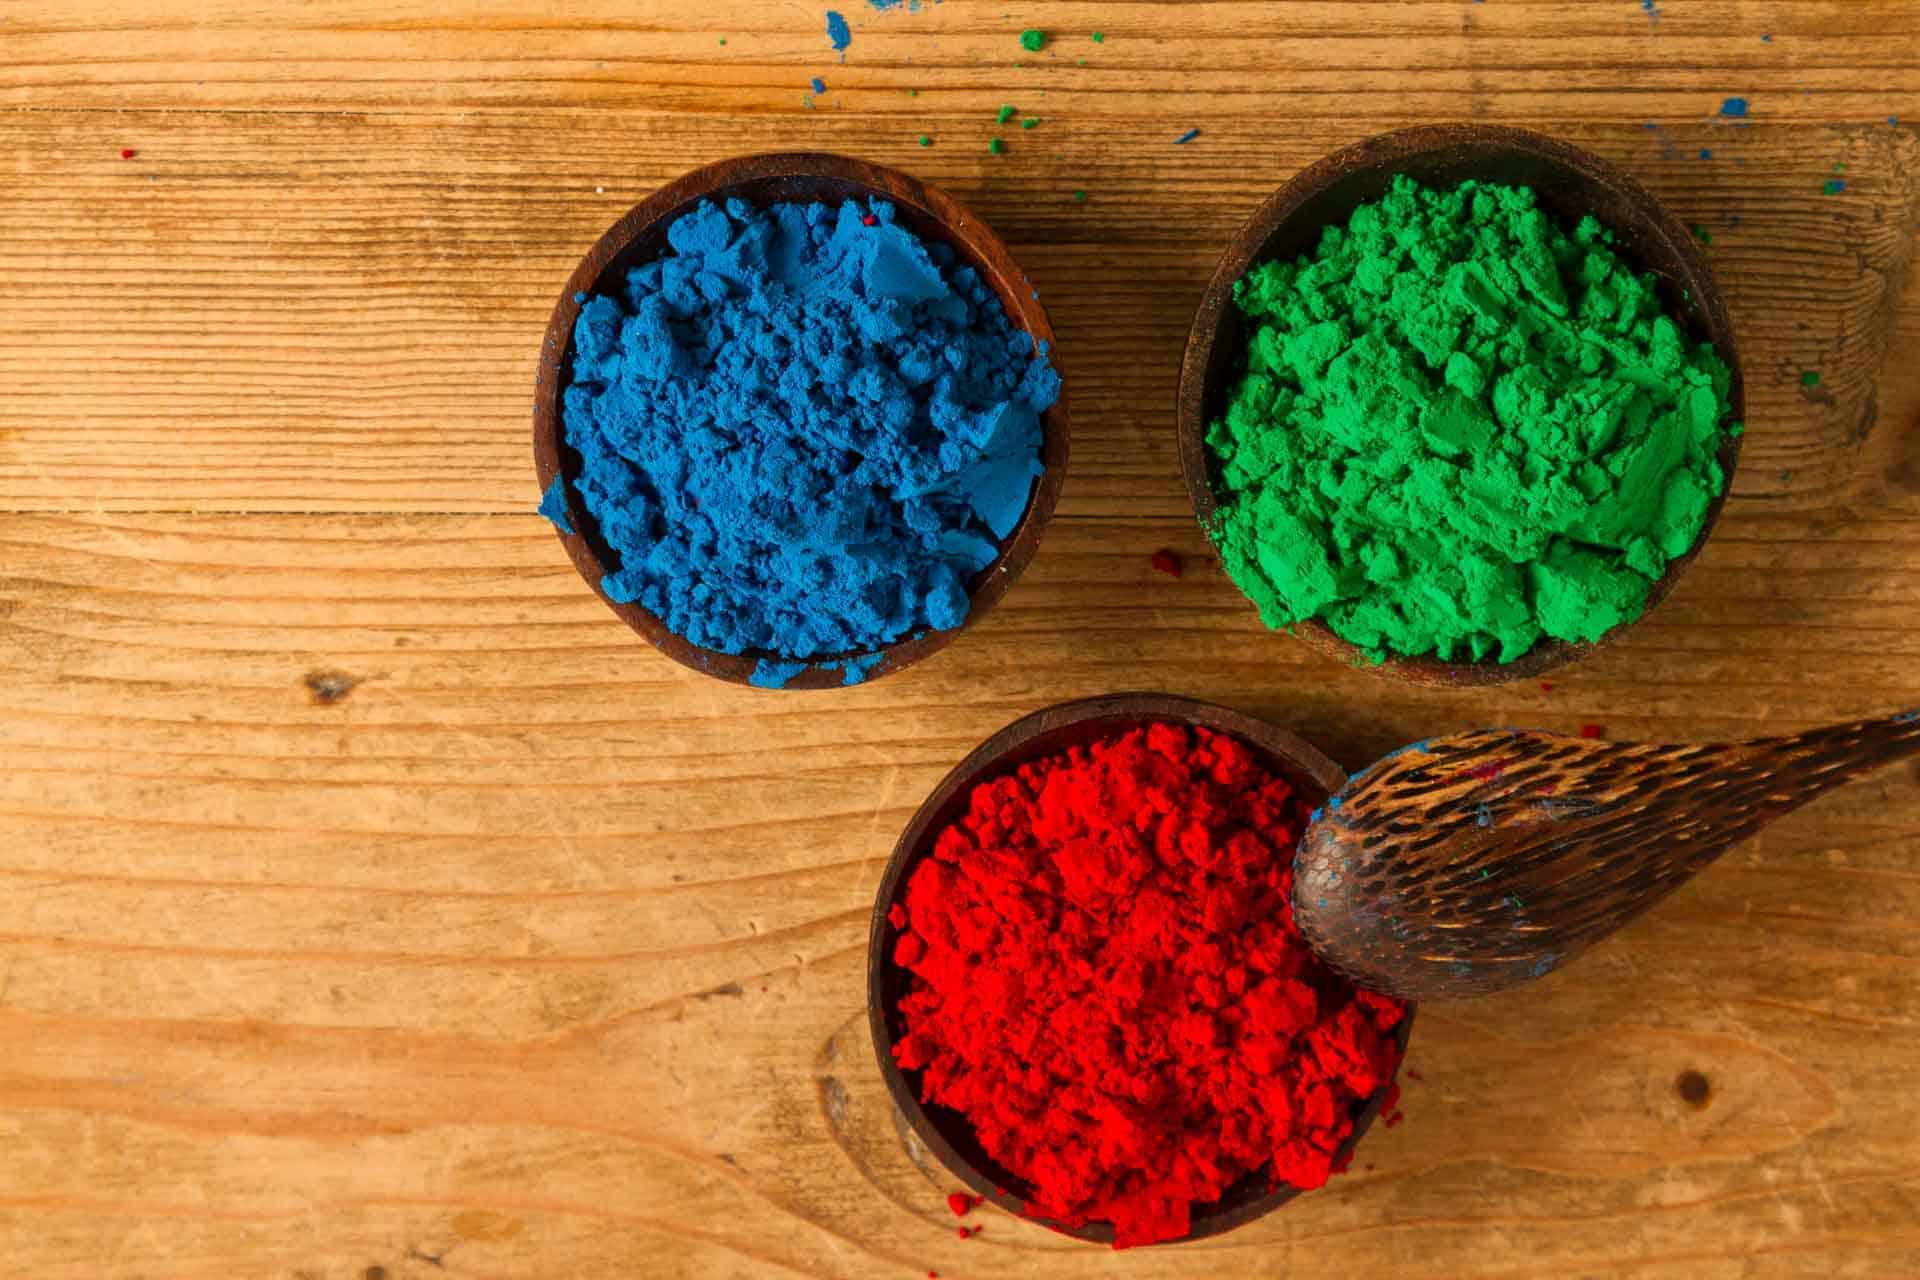 A real world rendition of the RGB subtractive colour system used in digital environments: red, green and blue powder pigments.